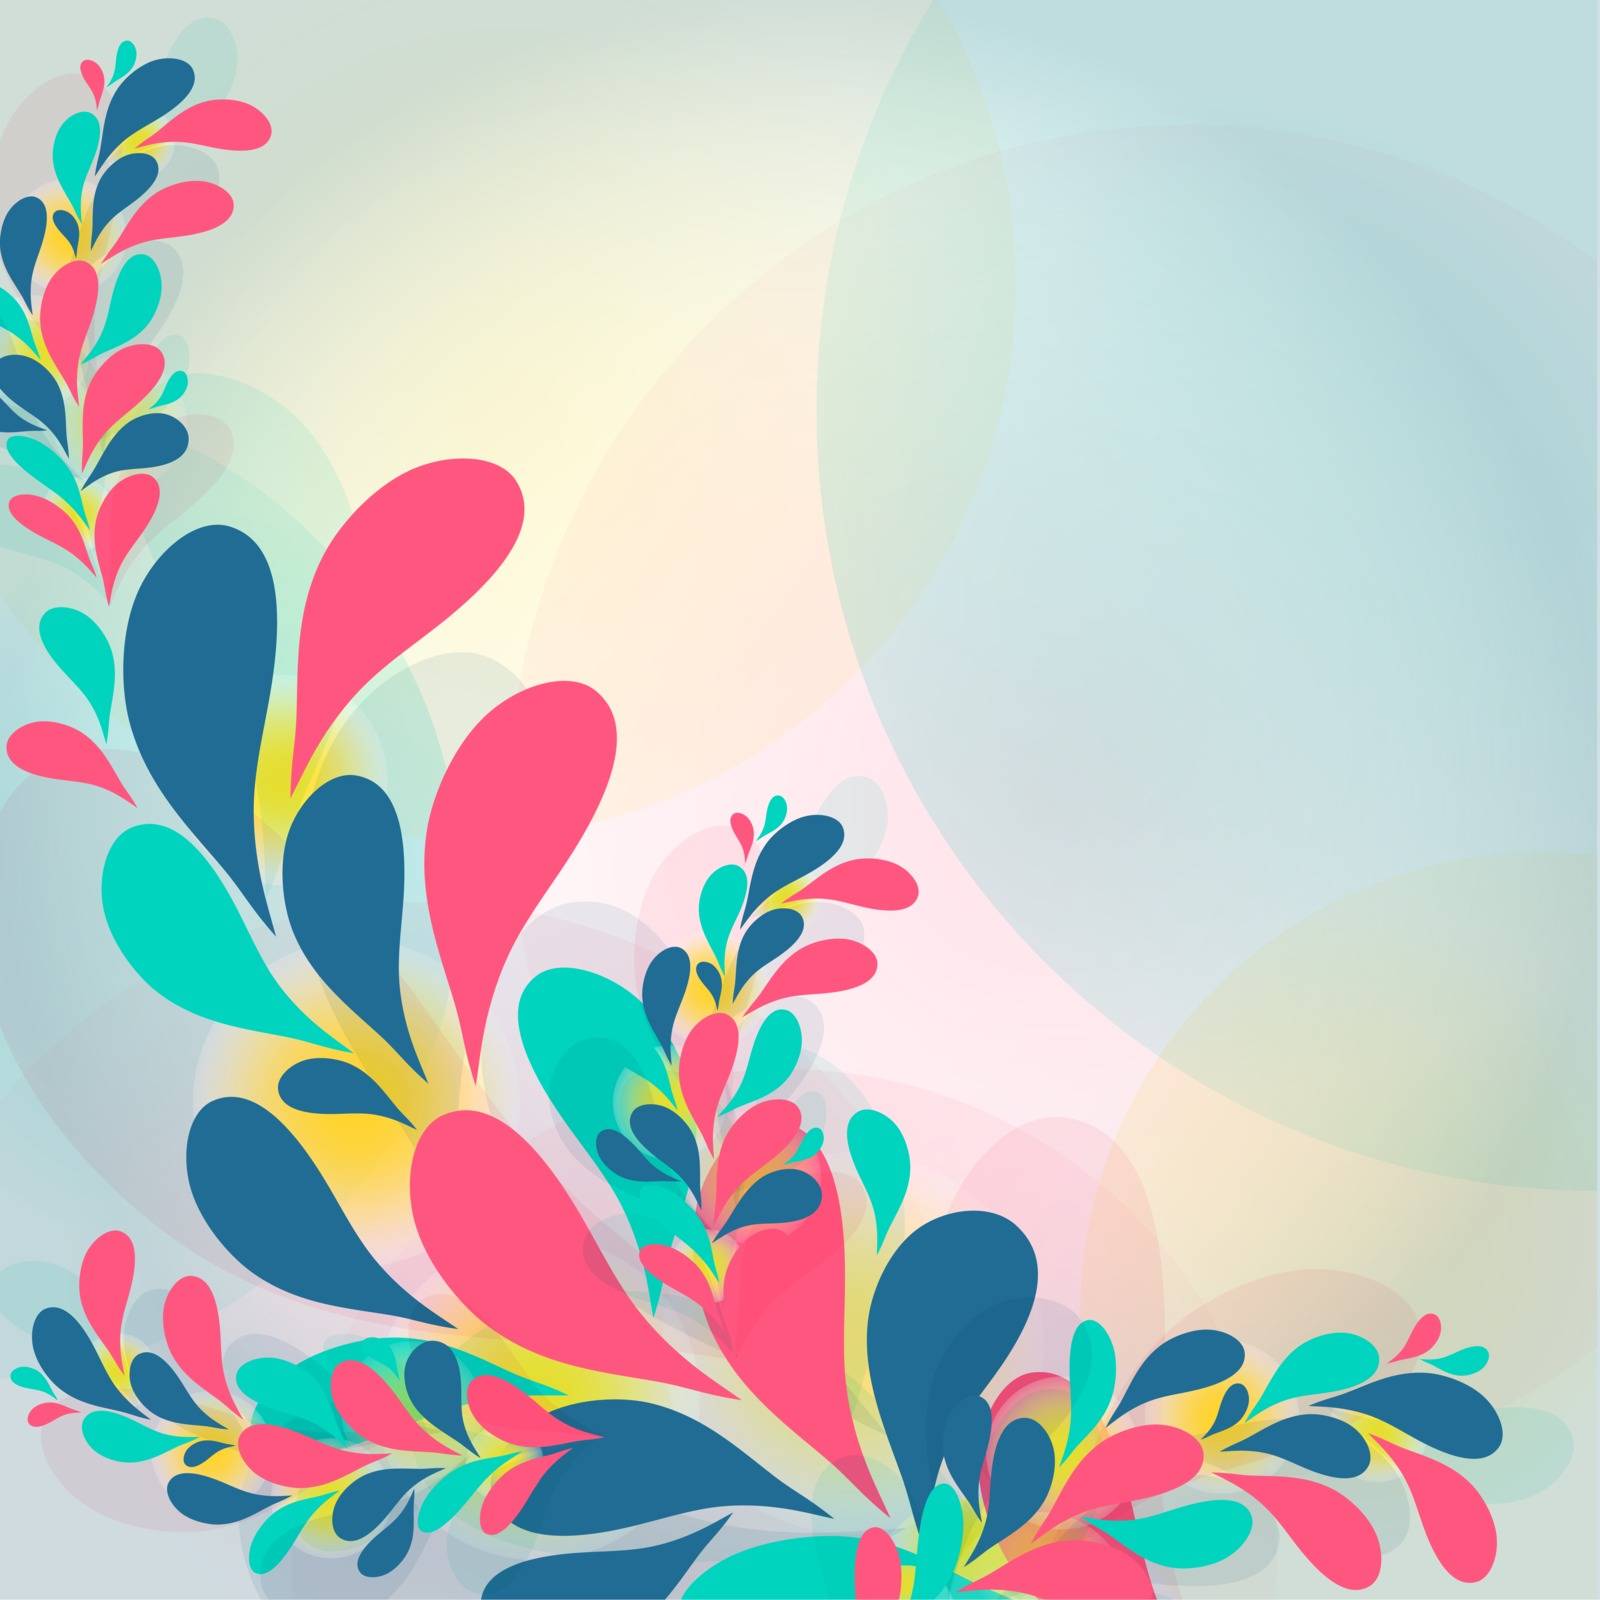 Abstract background with transparent ornament